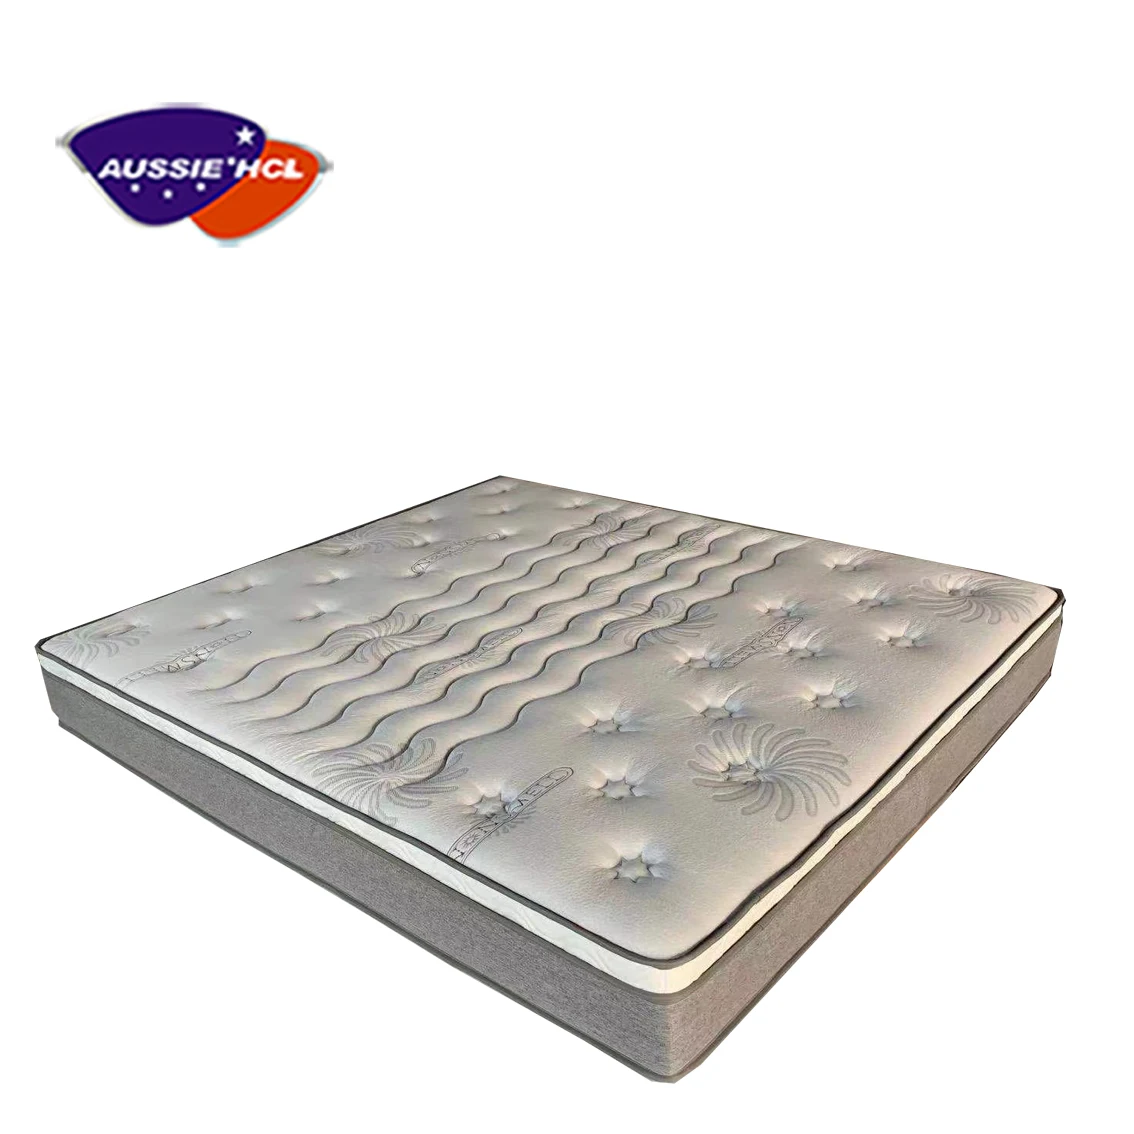 12 Inch gel Memory form Fabric Pocket Spring Mattress Customizes Orthopaedic Latex King Inflatable Size spring Mattresses